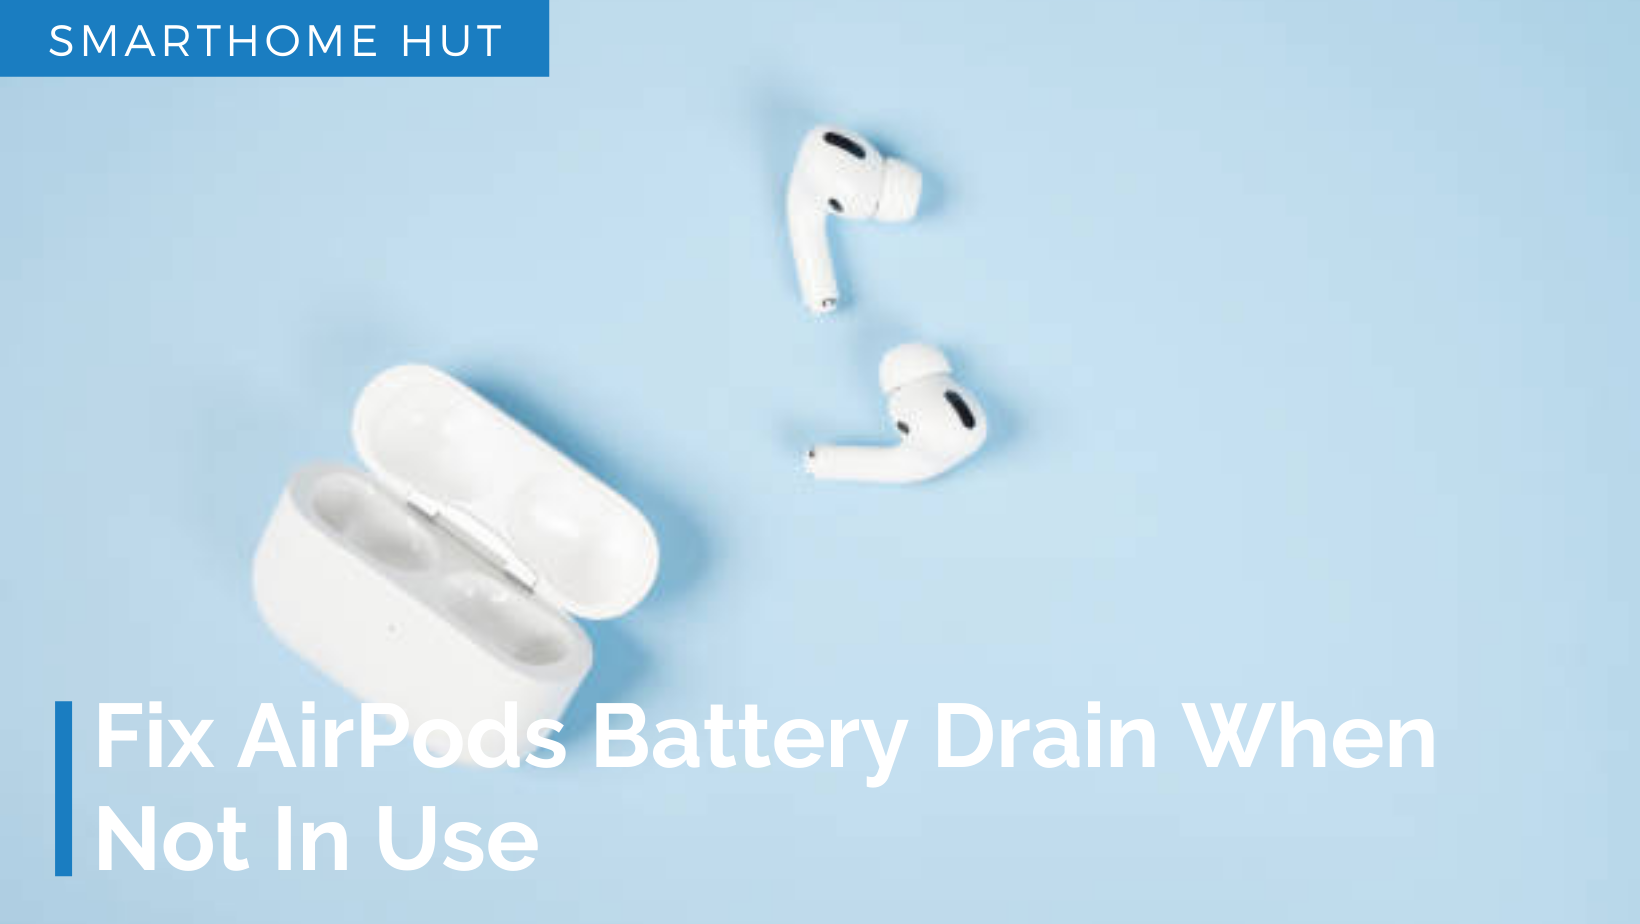 AirPods Battery Drain When Not In Use